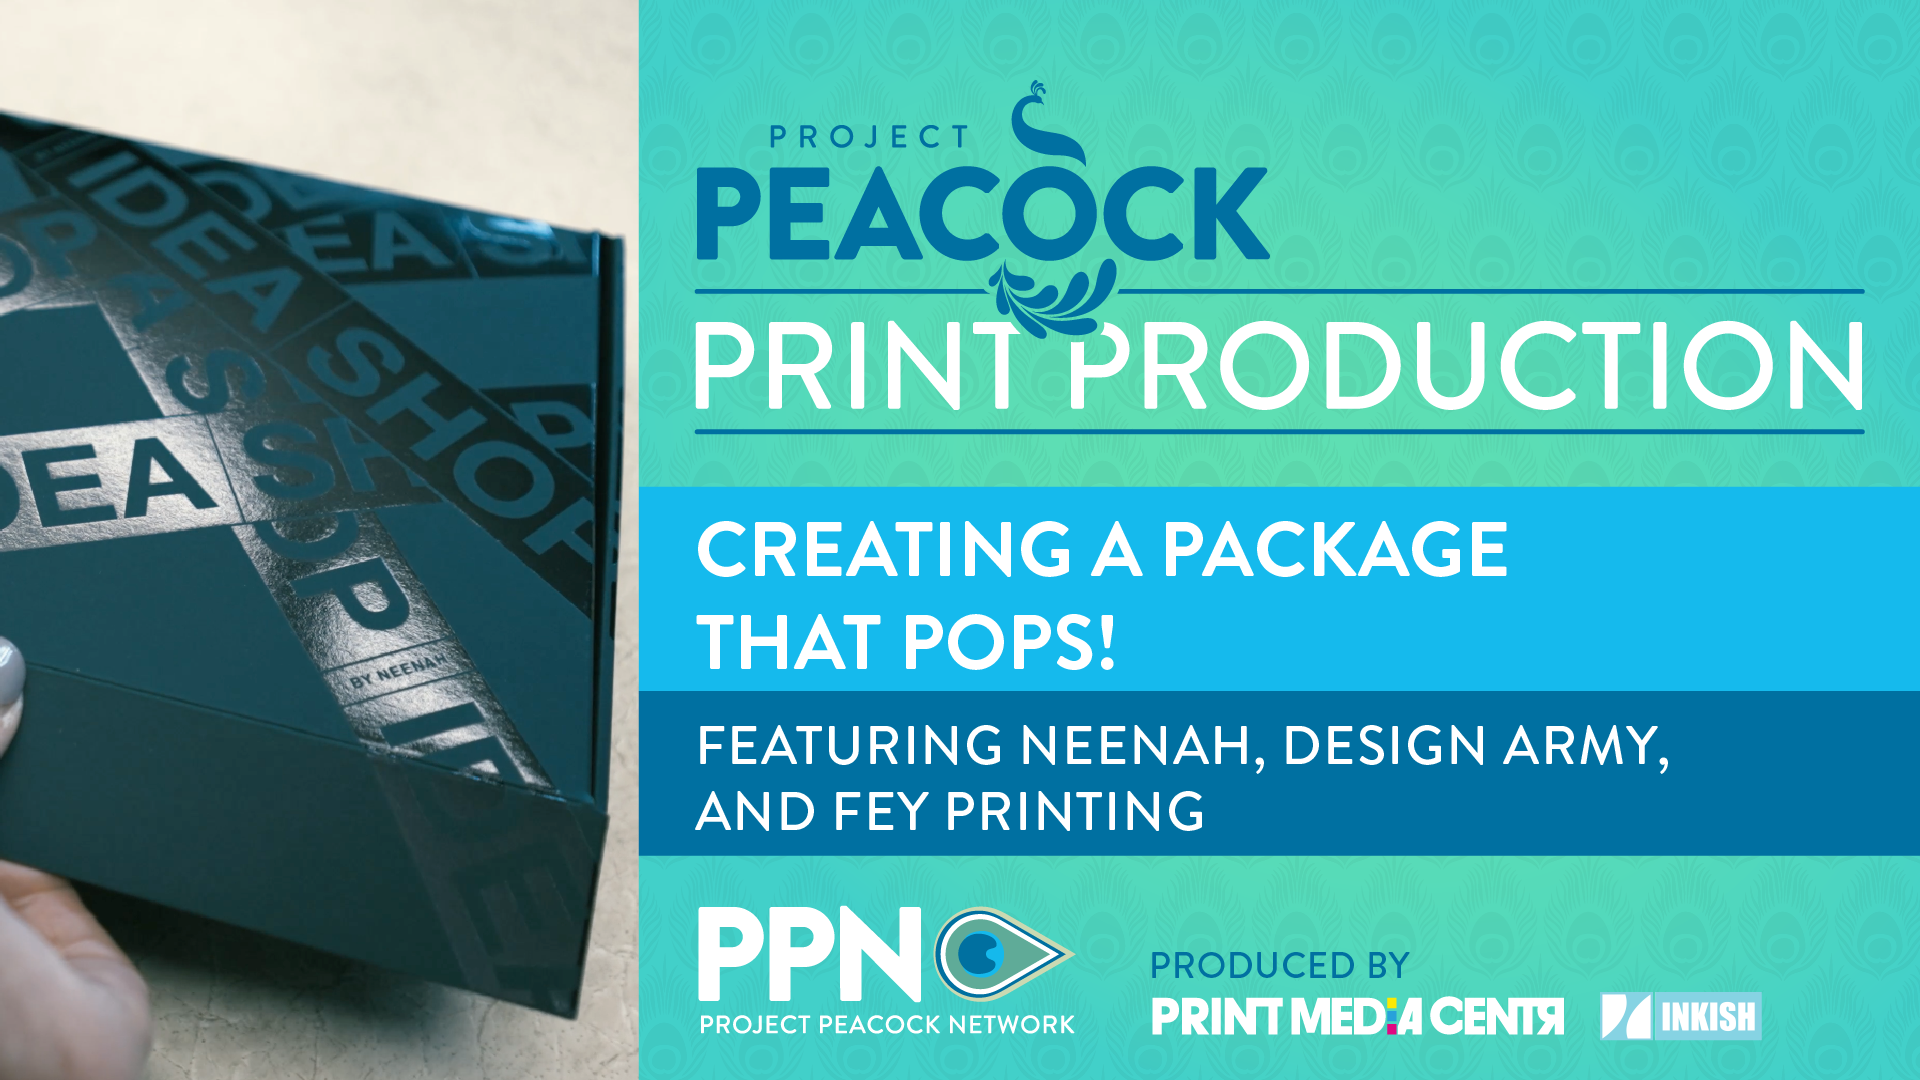 Project Peacock Print Production: Creating a Package that POPS!